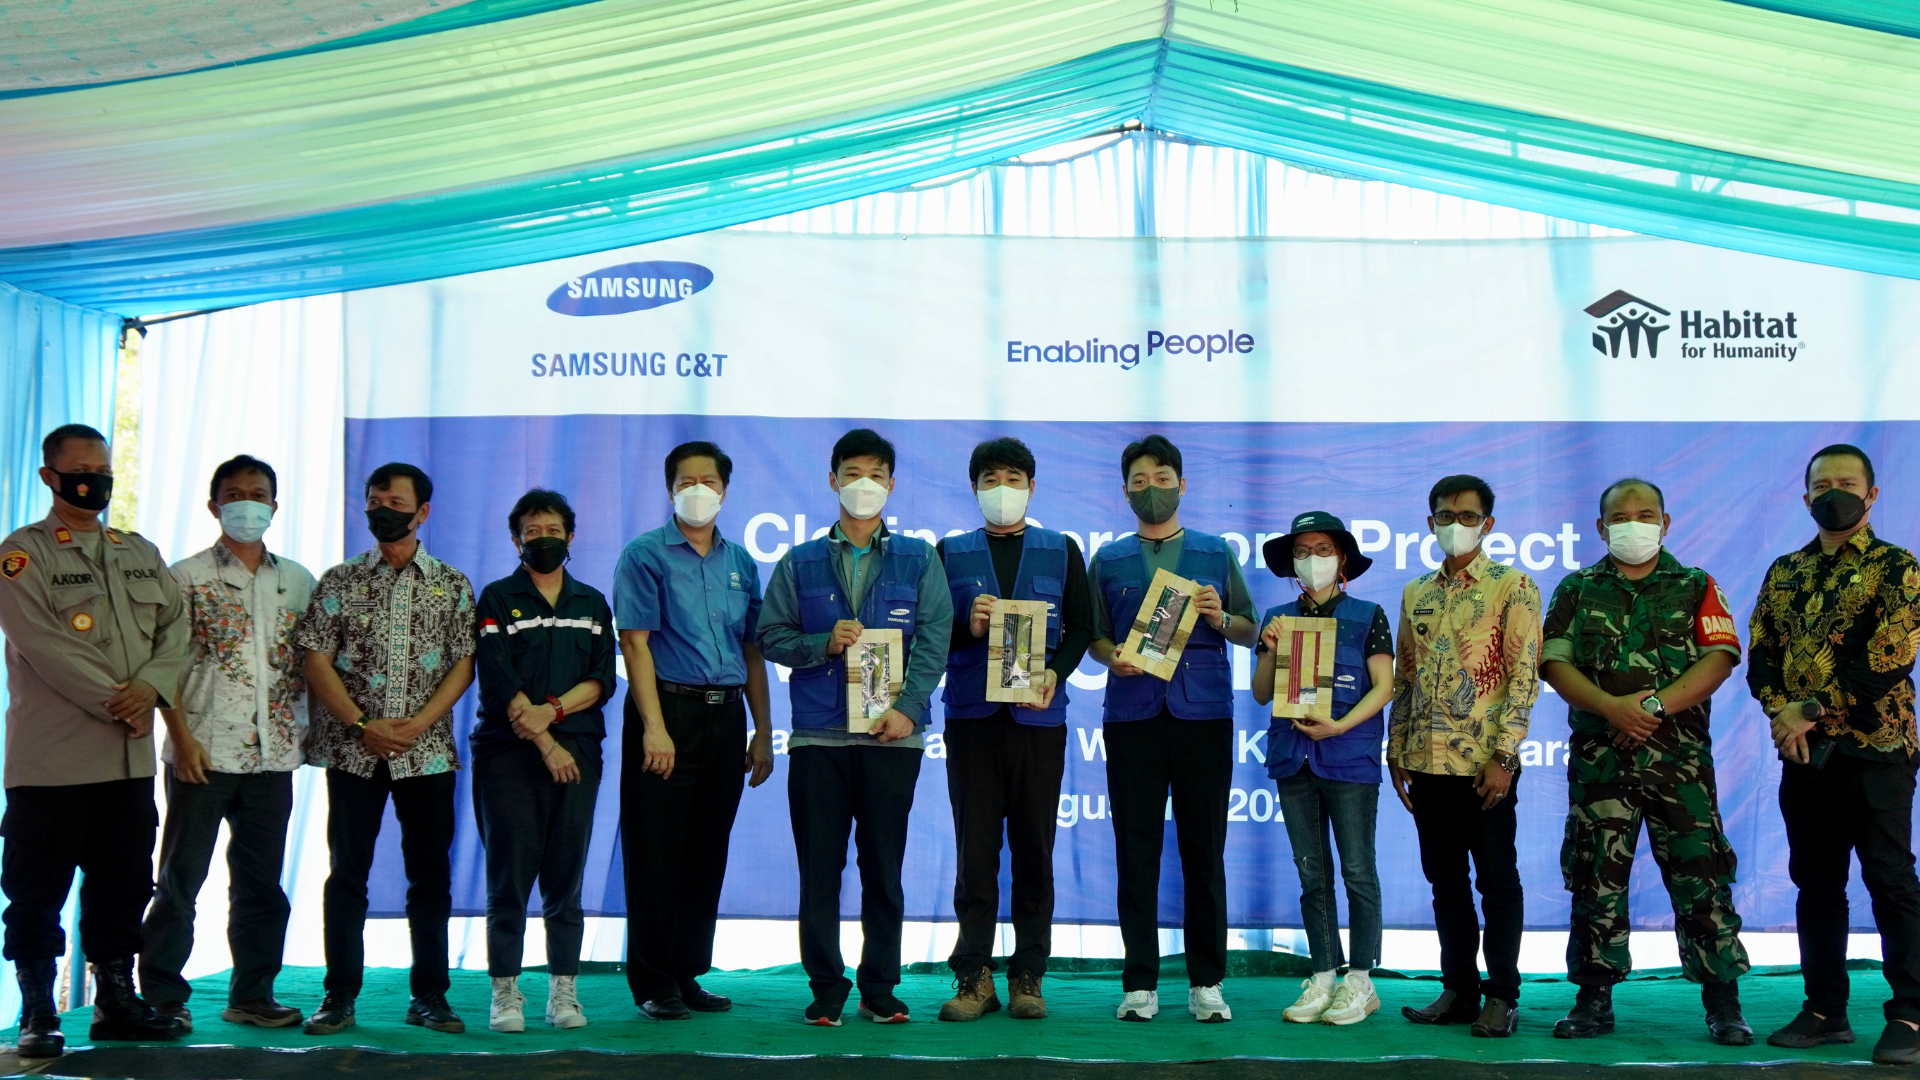 Habitat for Humanity Indonesia and Samsung C&T Accomplish the Second Phase of the Community Development Program in Cilamaya through Samsung Village #9 Project